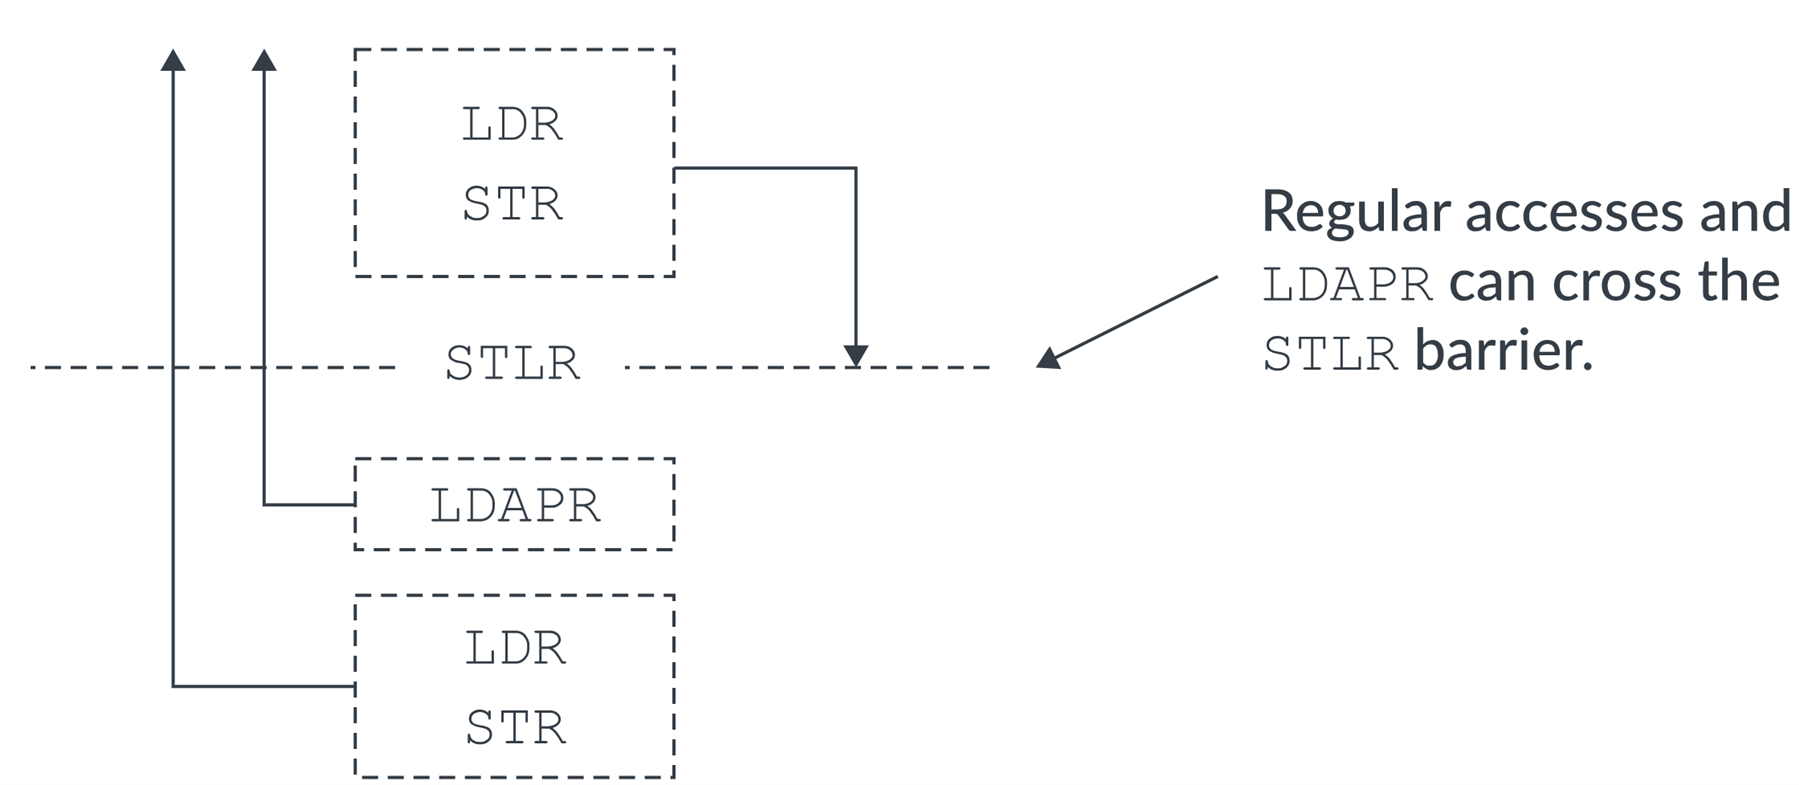 Ordering requirements on LDAPR-based acquire-release sequences